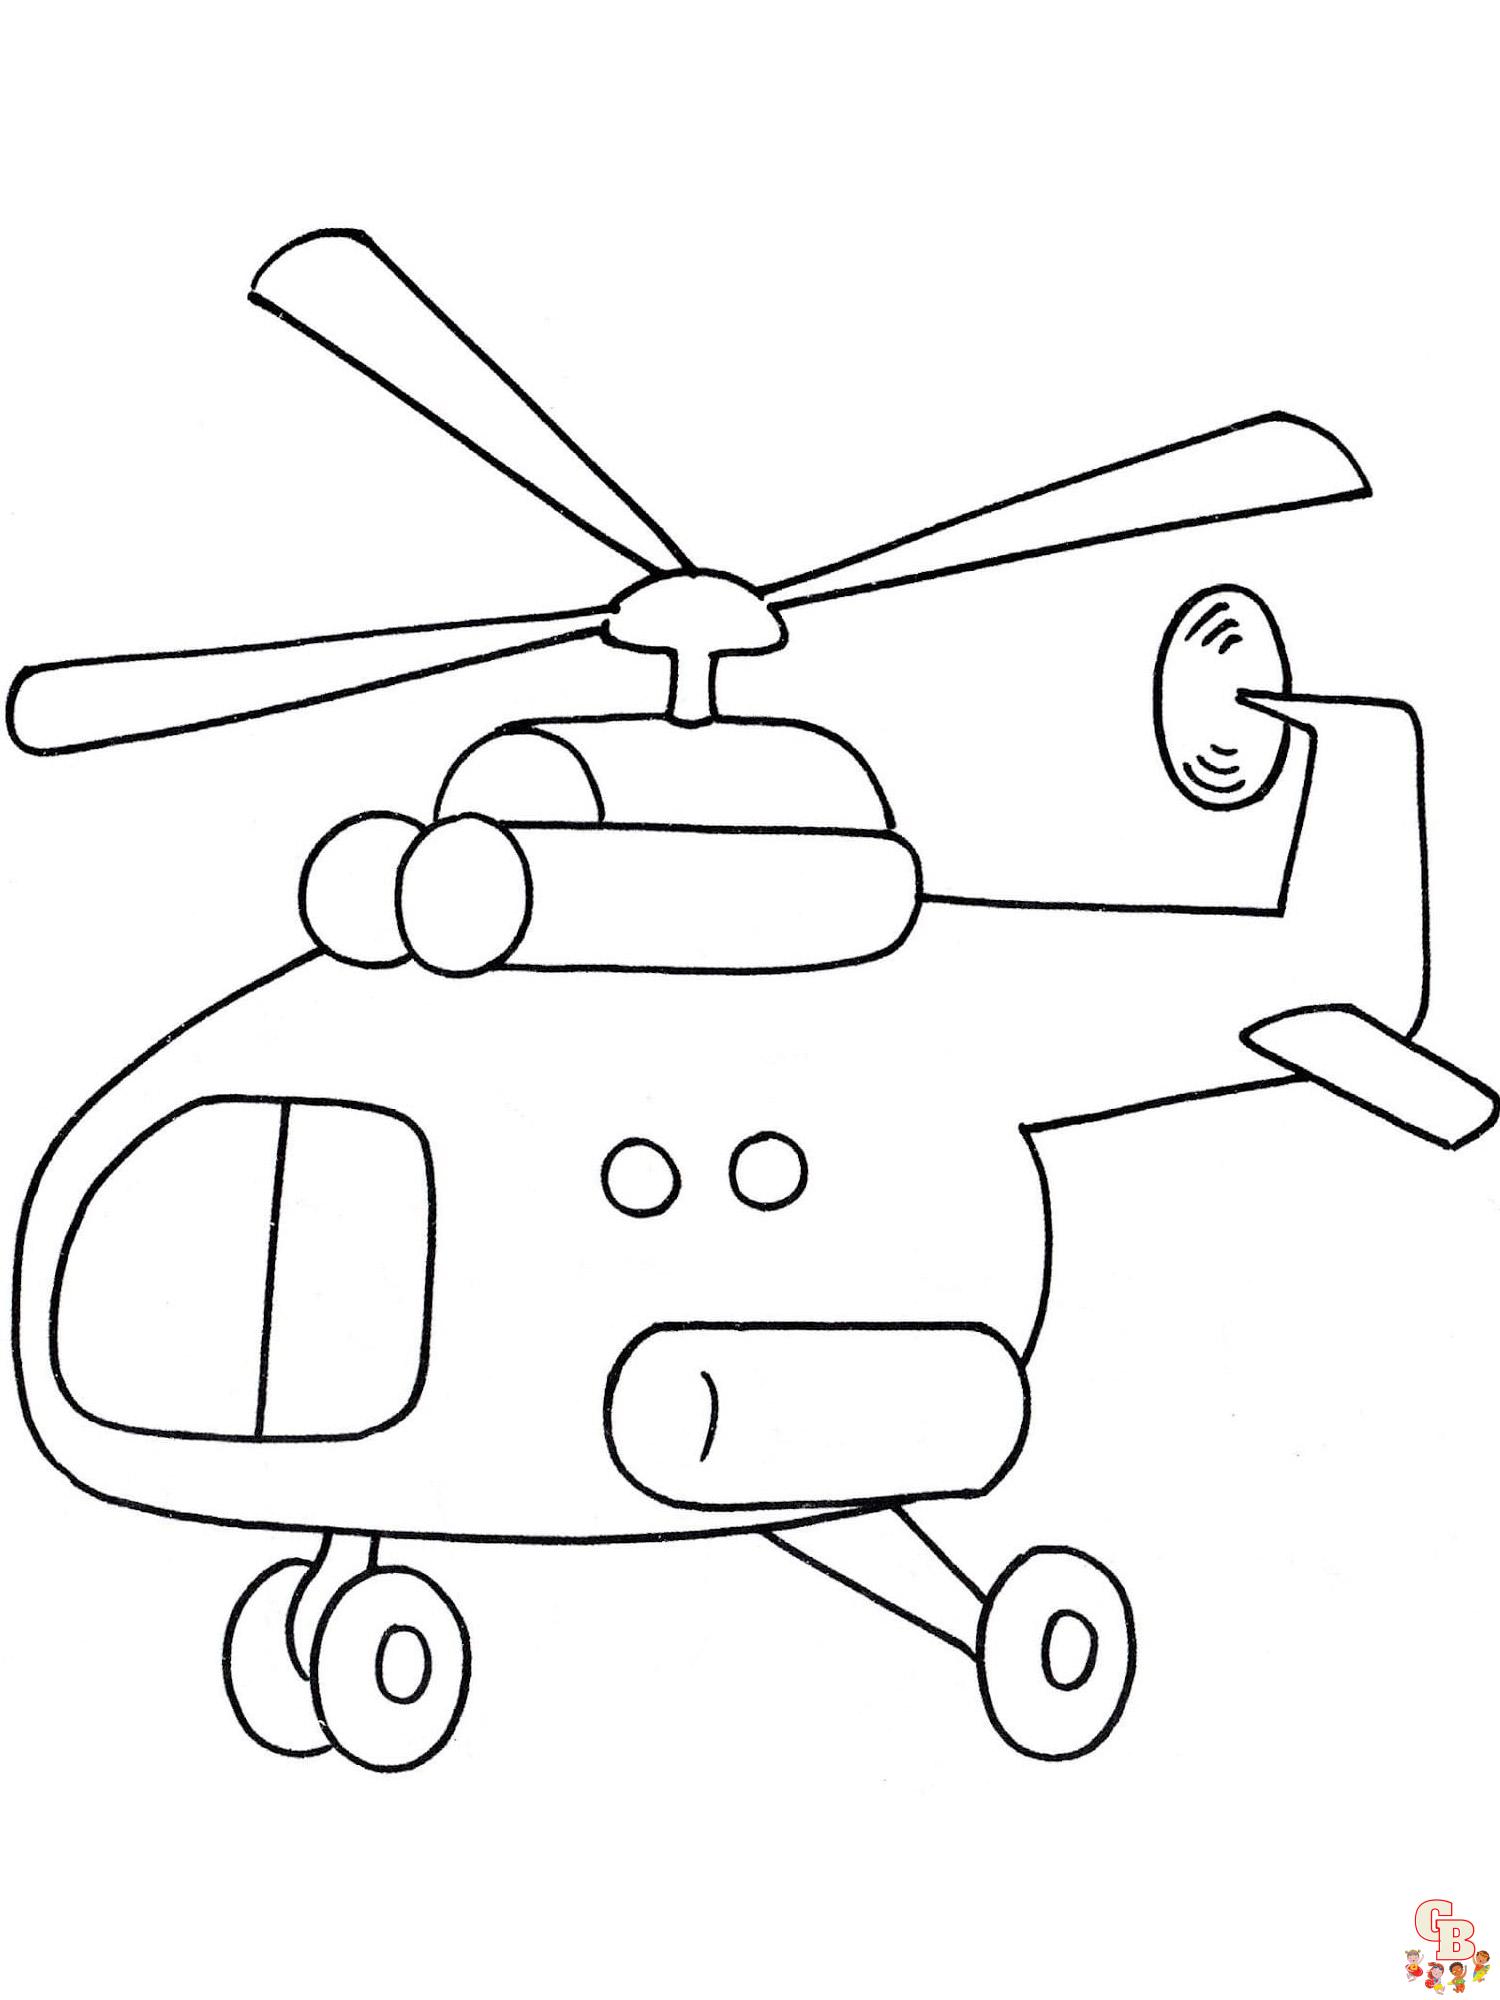 coloriage helicopteres